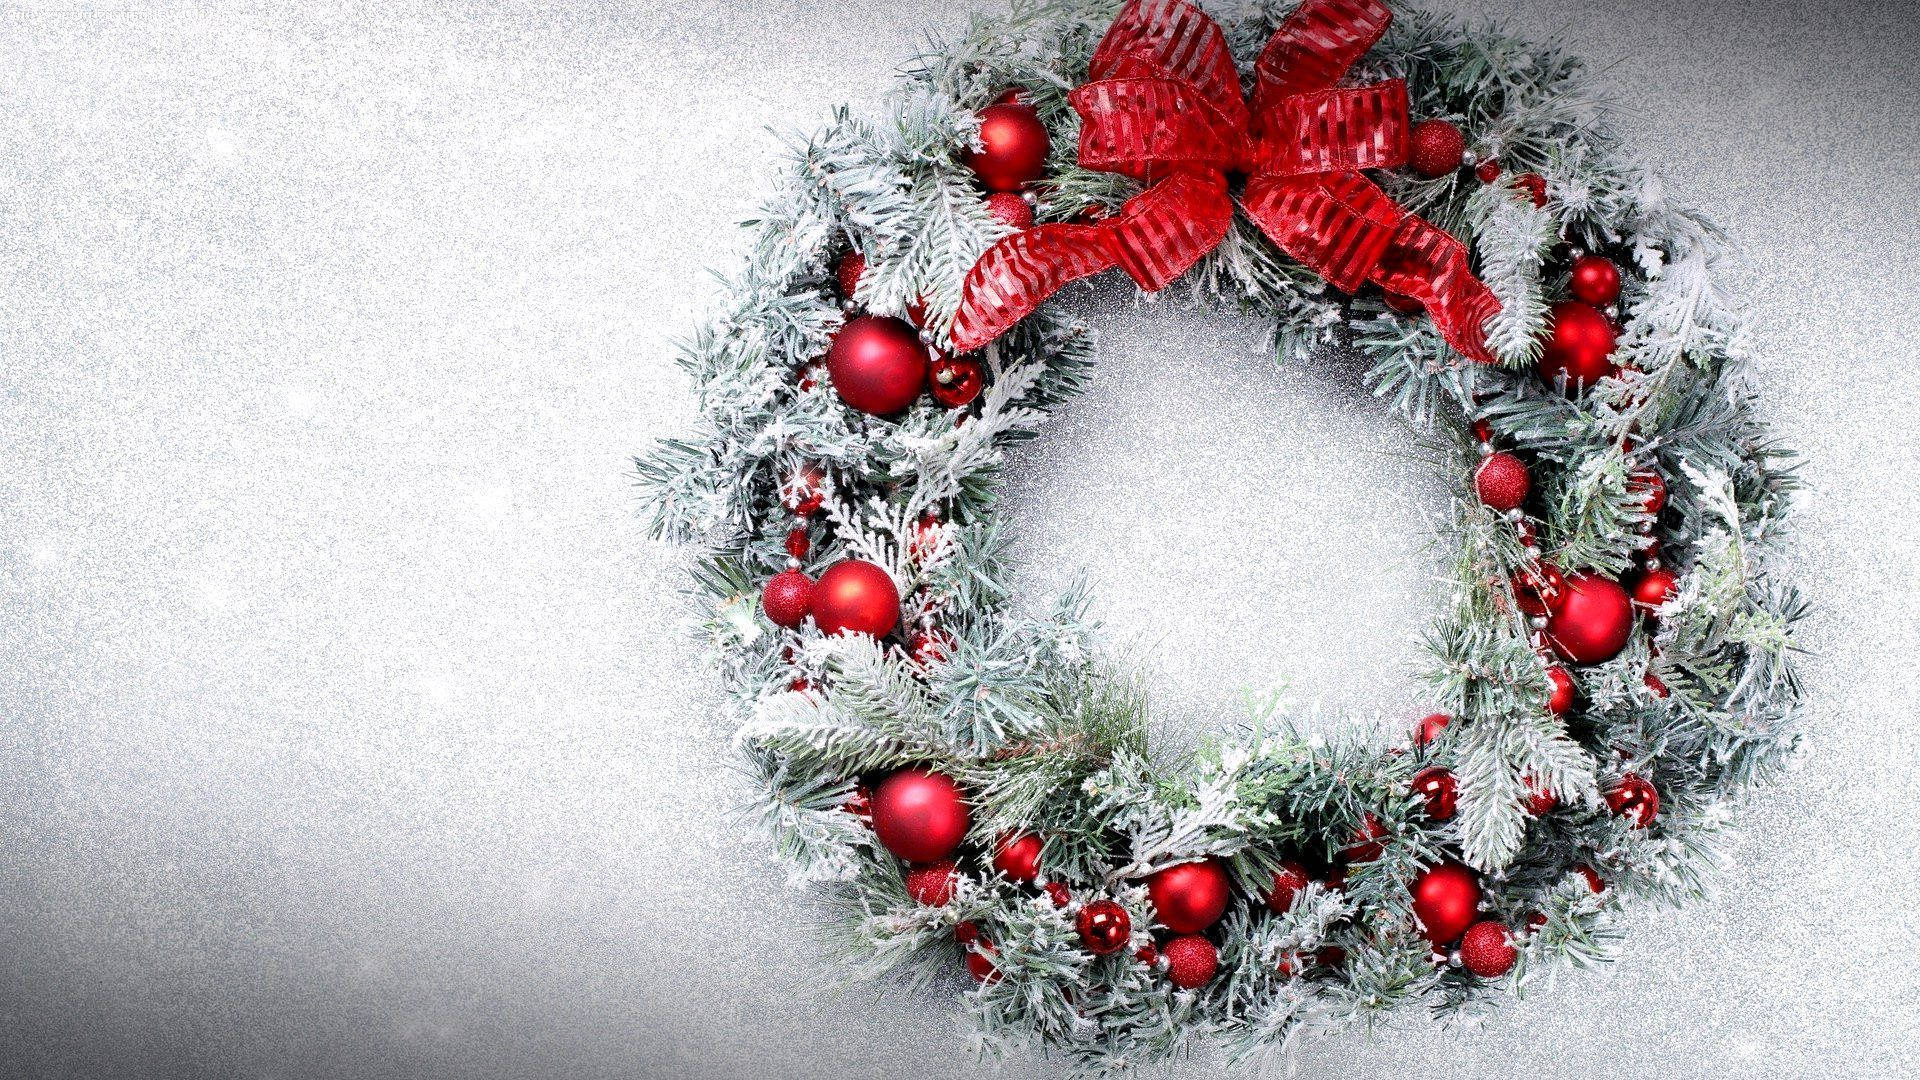 Christmas Wreath In Thick White Snow Wallpaper